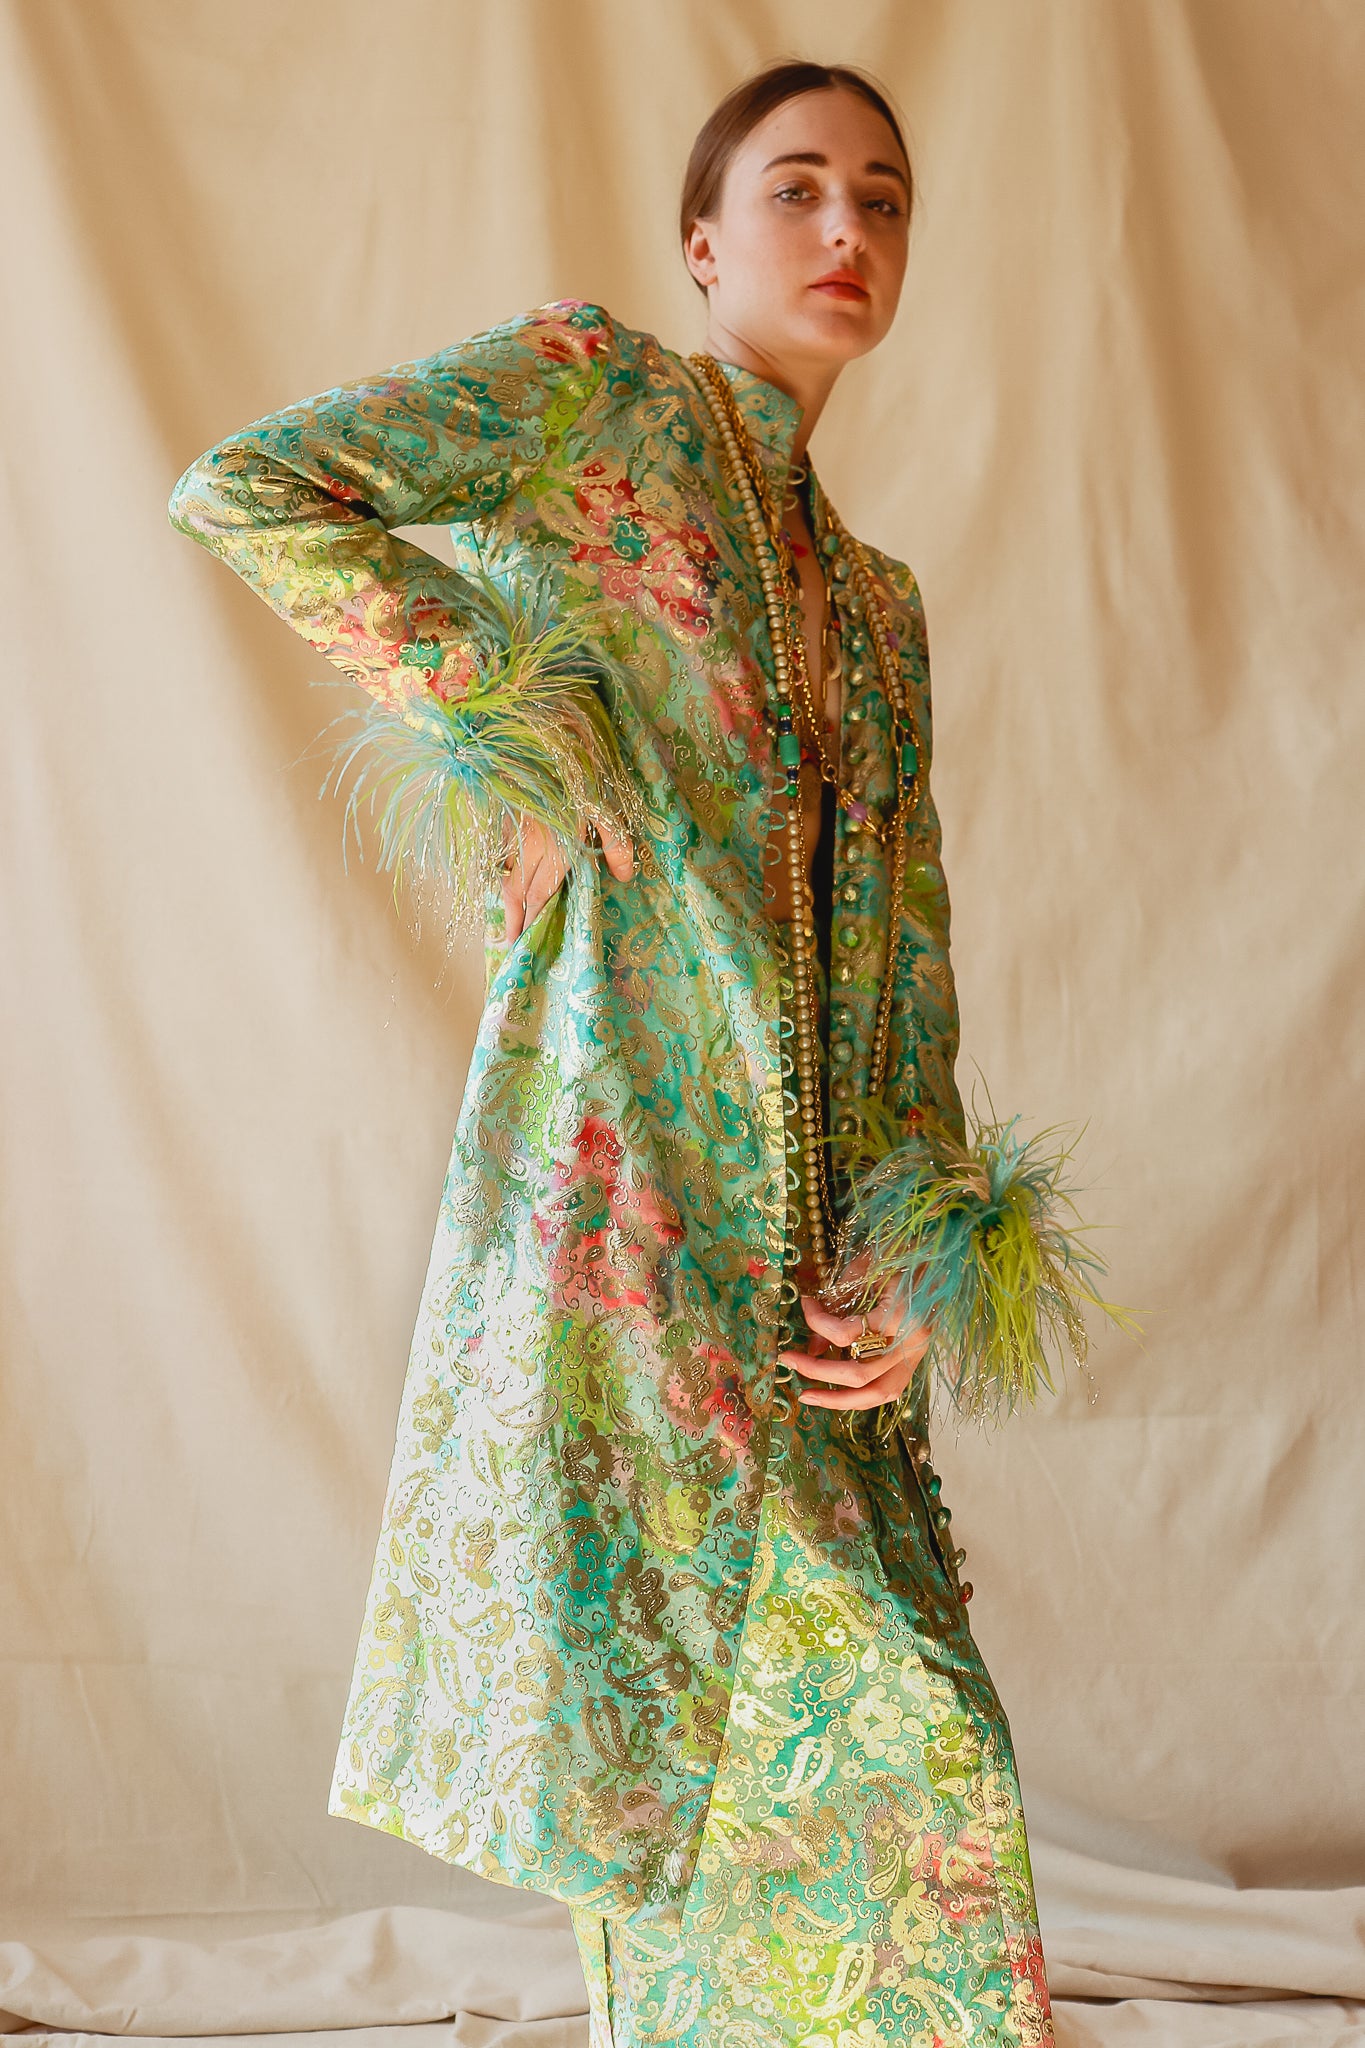 Recess Vintage Consignment Girl in green brocade Victor Costa feather jacket set